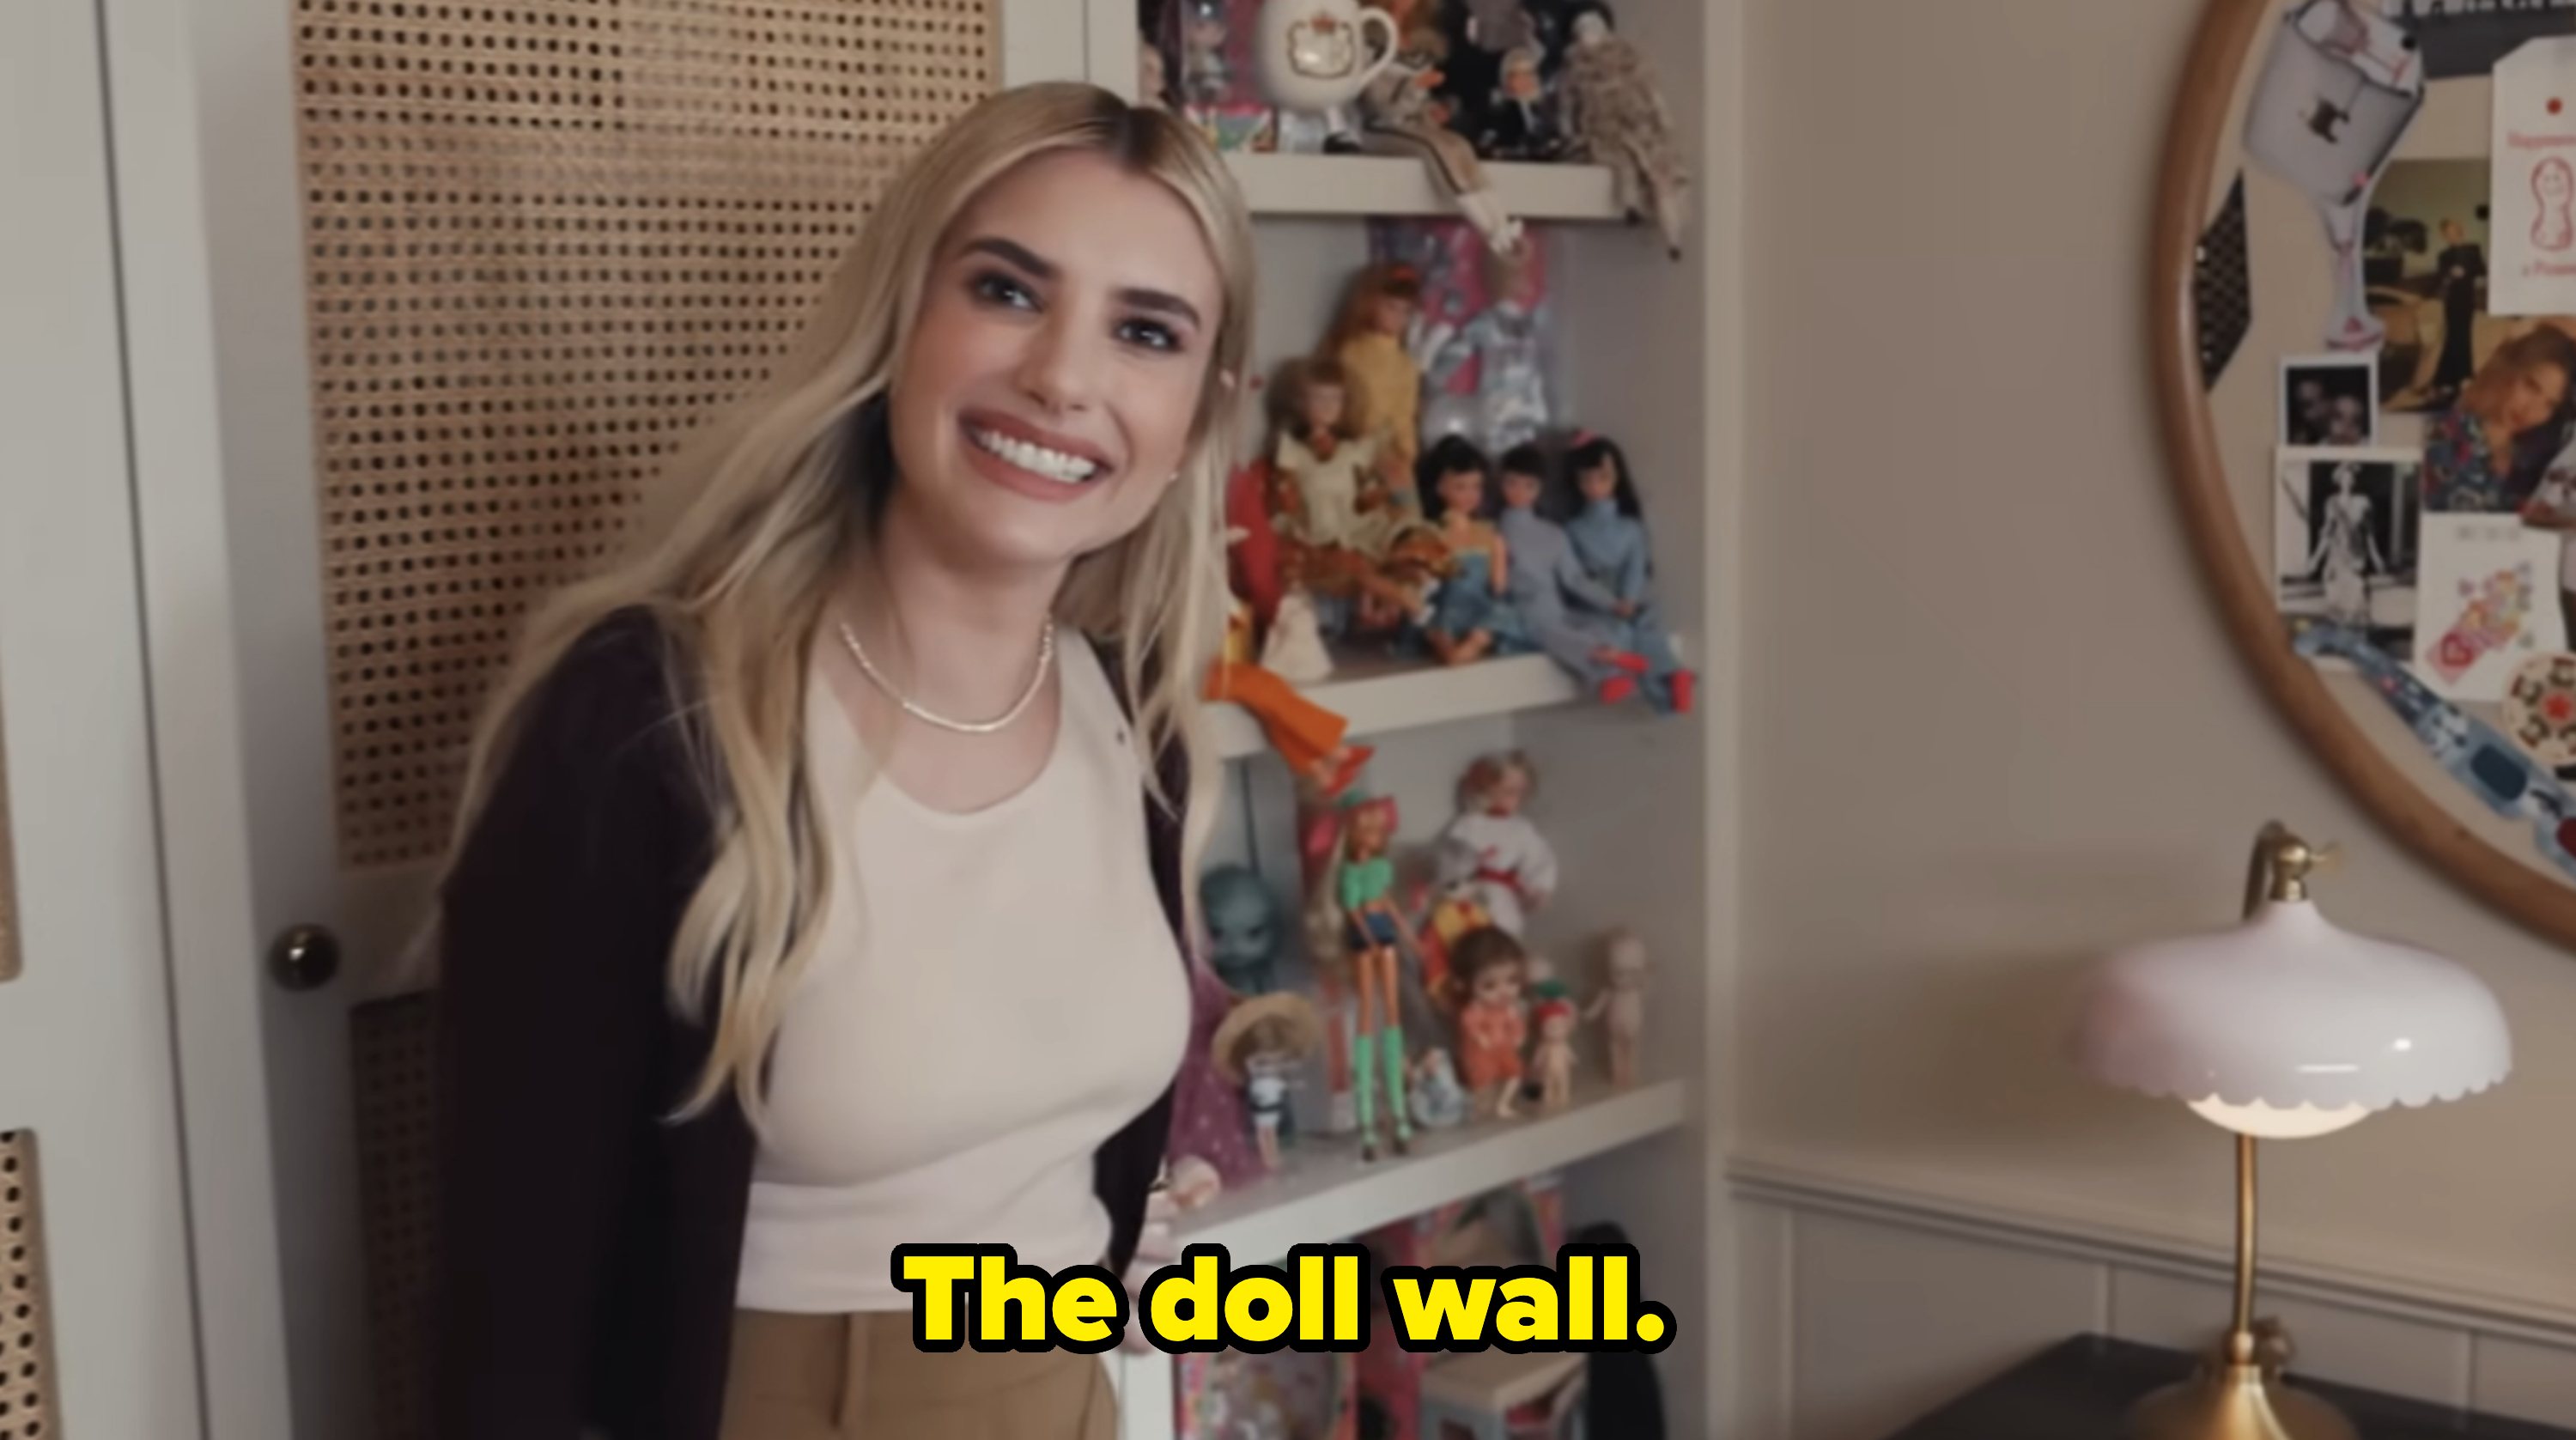 Emma Roberts showing her doll wall